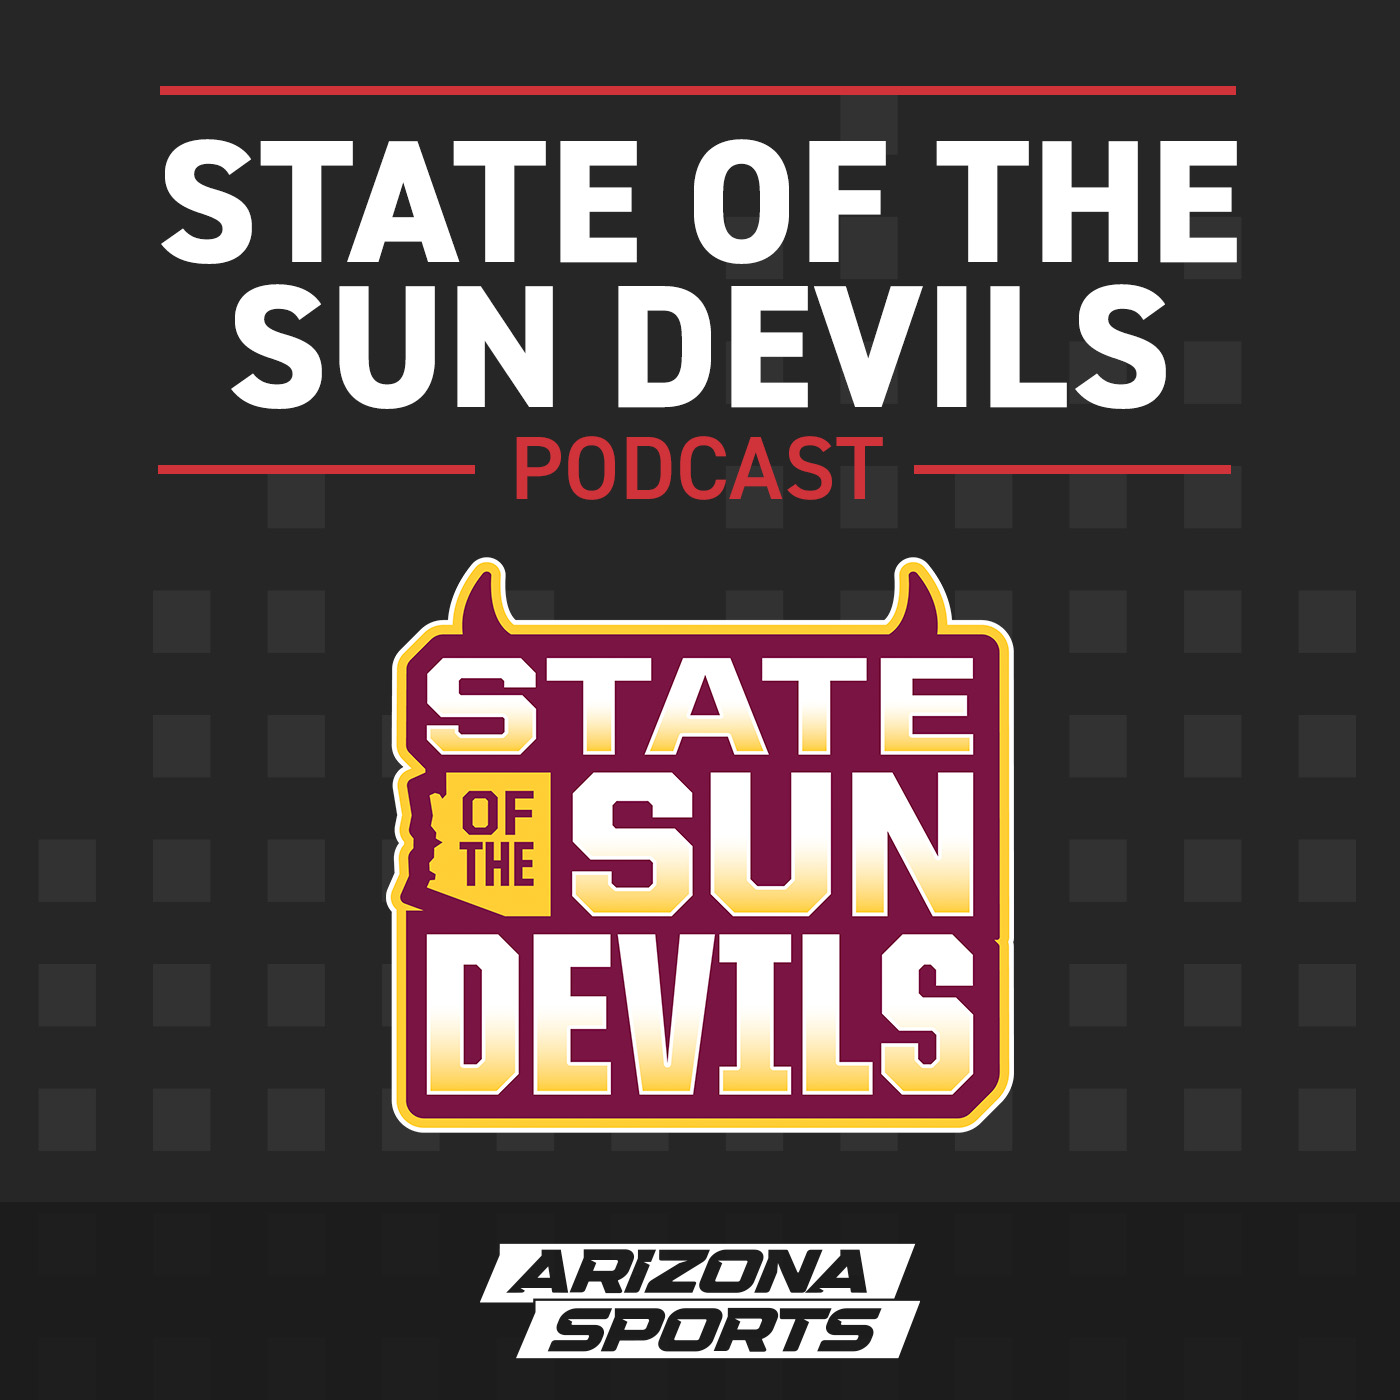 Arizona State shutout in the second half and handed its first loss postgame reaction - Sept. 9